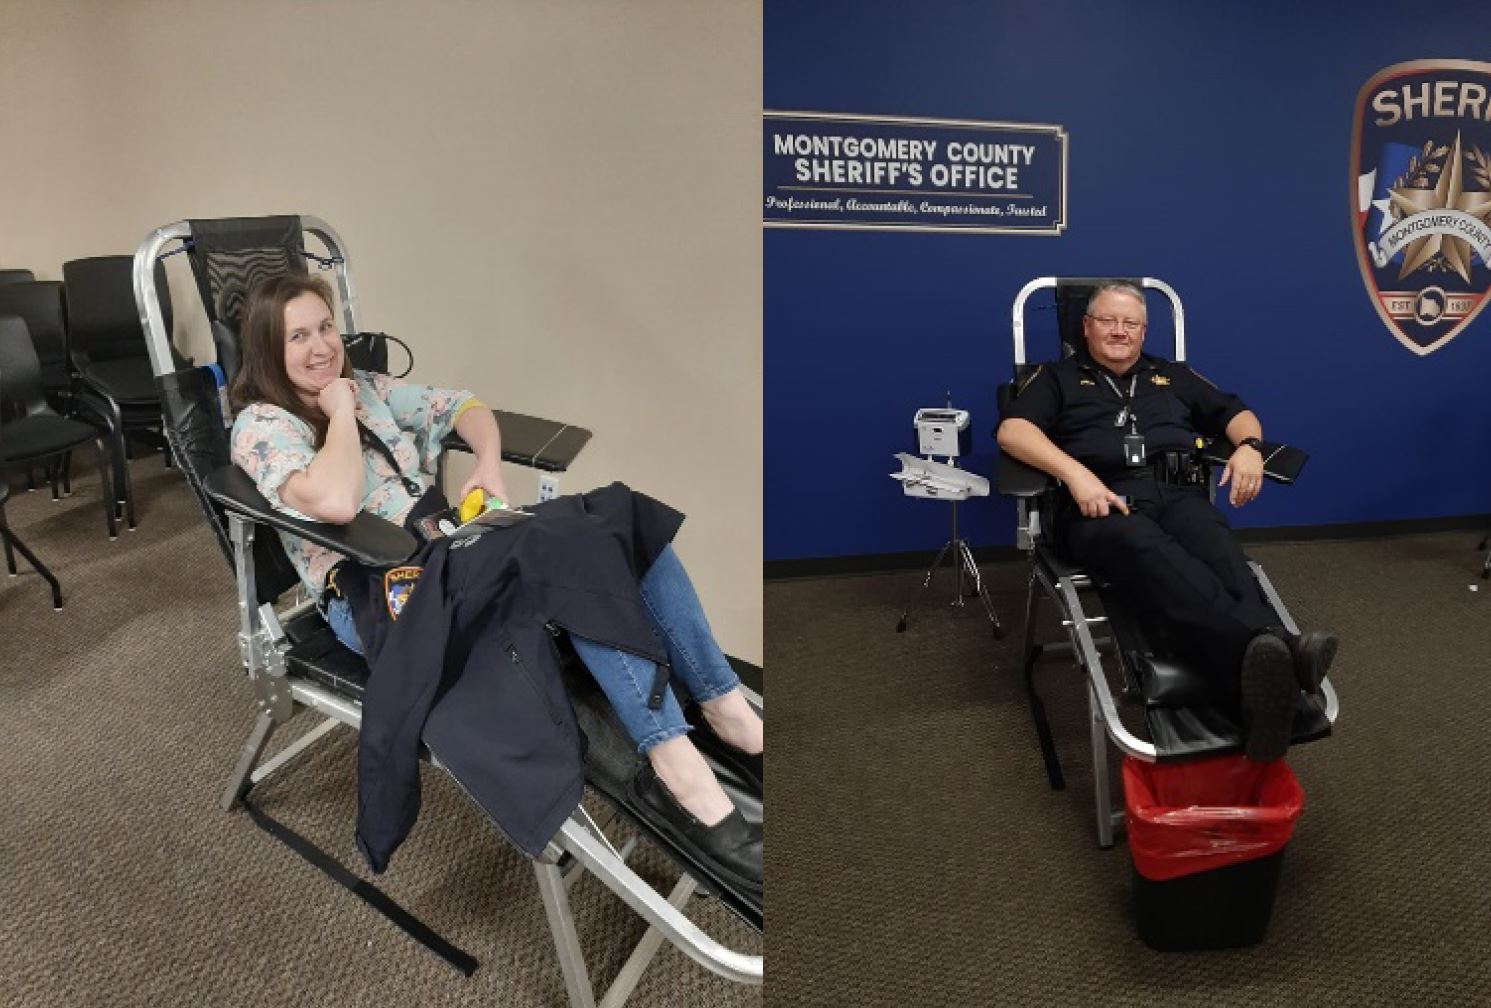 Specialist Maggie Strong and Lieutenant Kenneth  Dunlap pictured giving blood